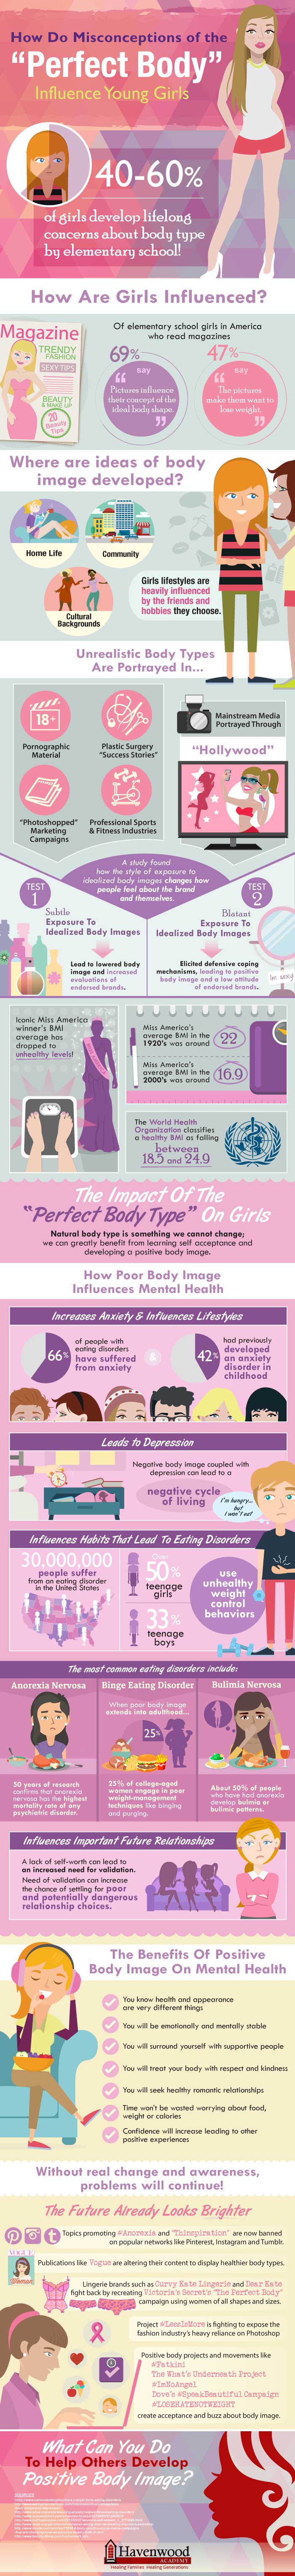 How-Do-Misconceptions-Of-The-Perfect-Body-Type-Influence-Girls-Infographic-plaza